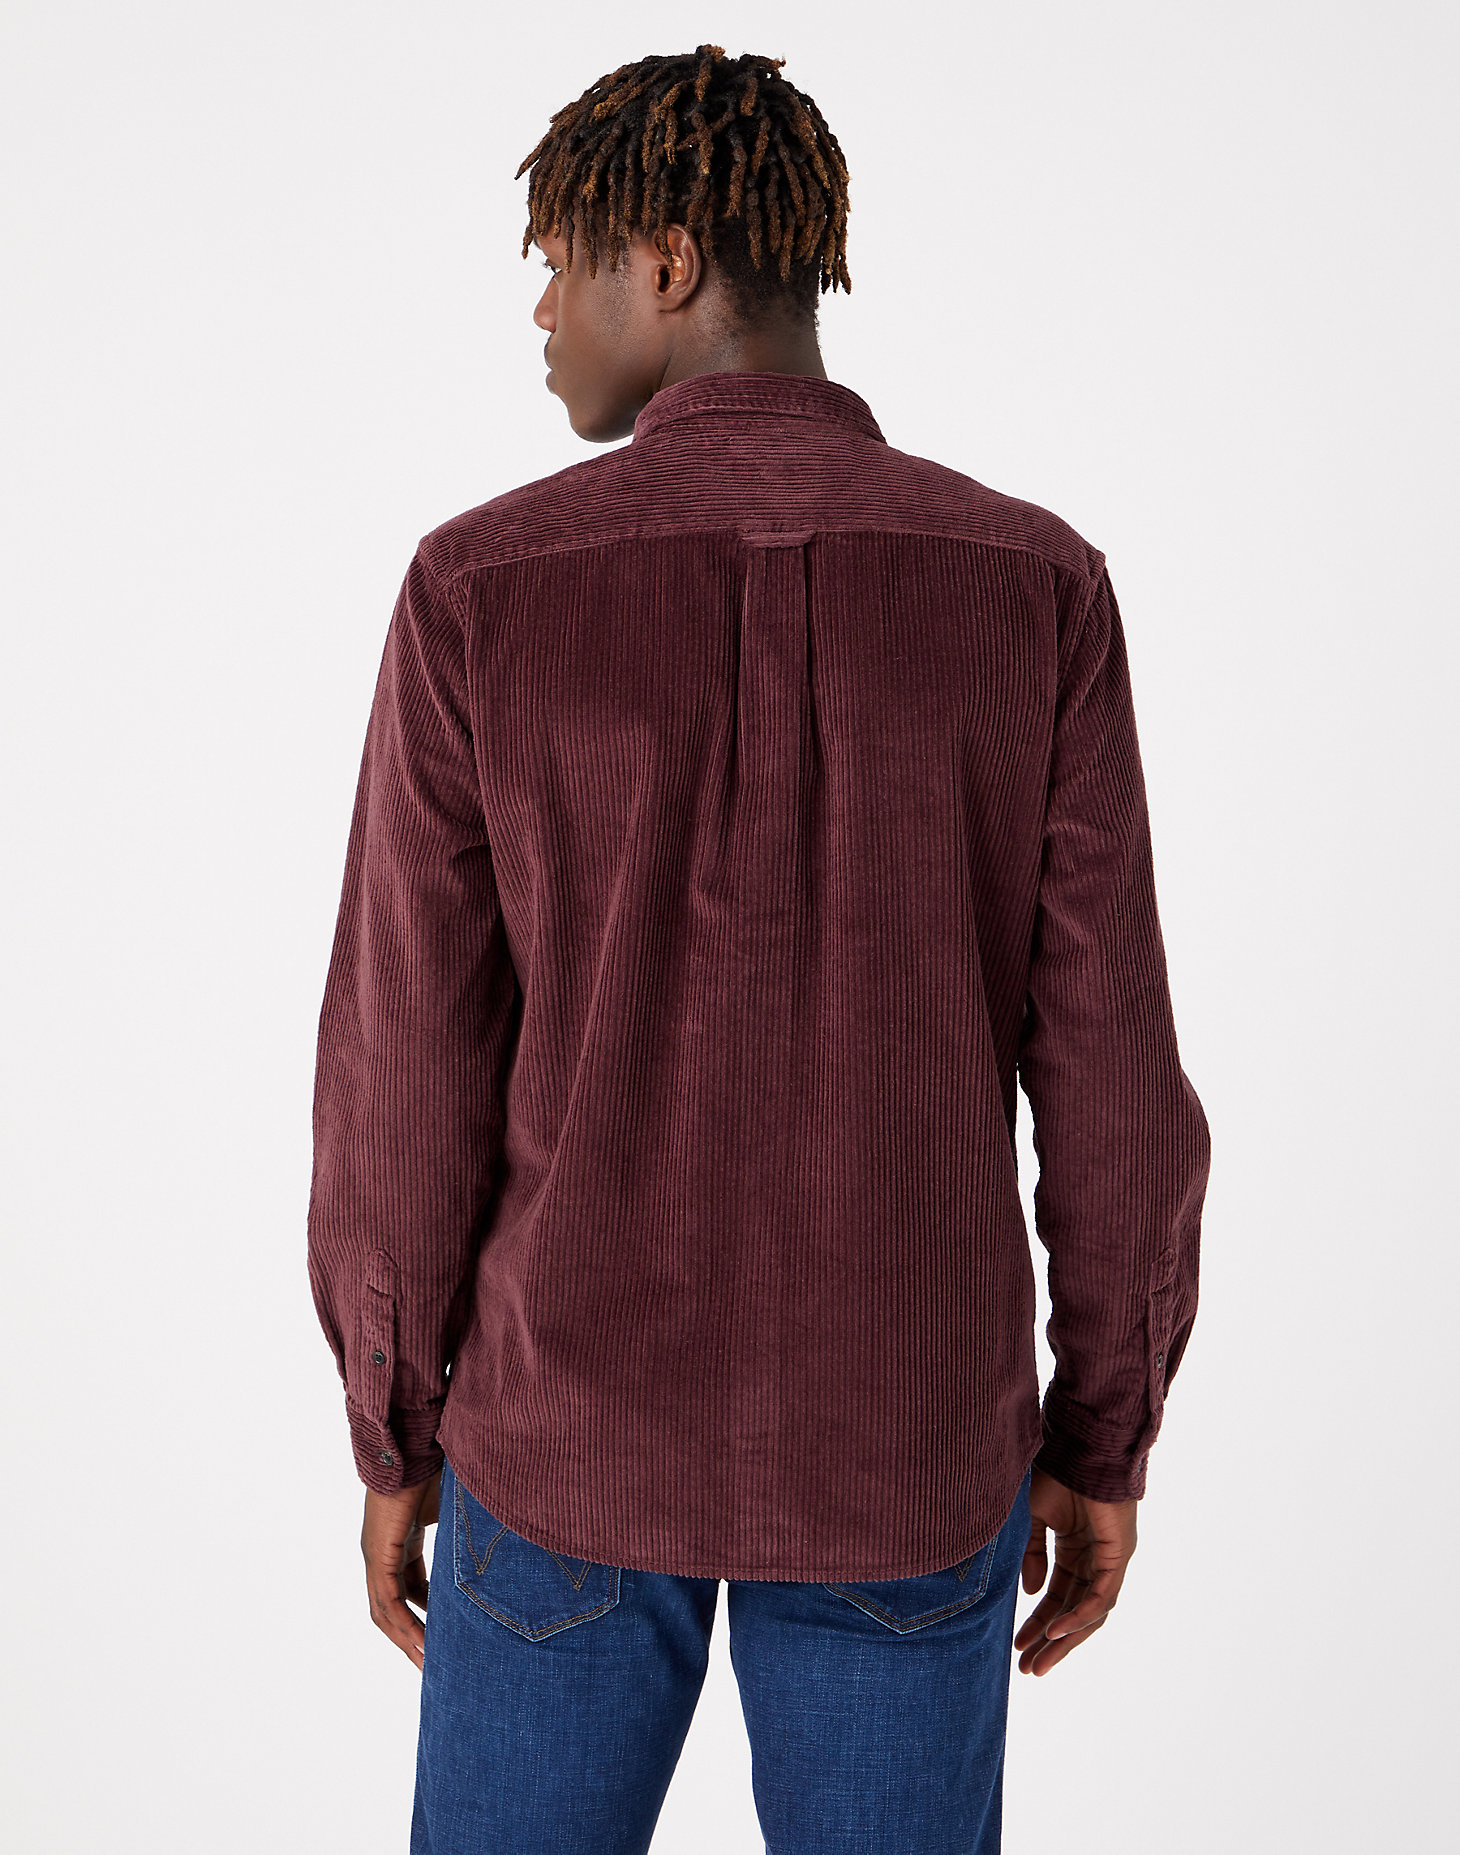 Two Flap Pocket Shirt in Aubergine alternative view 2